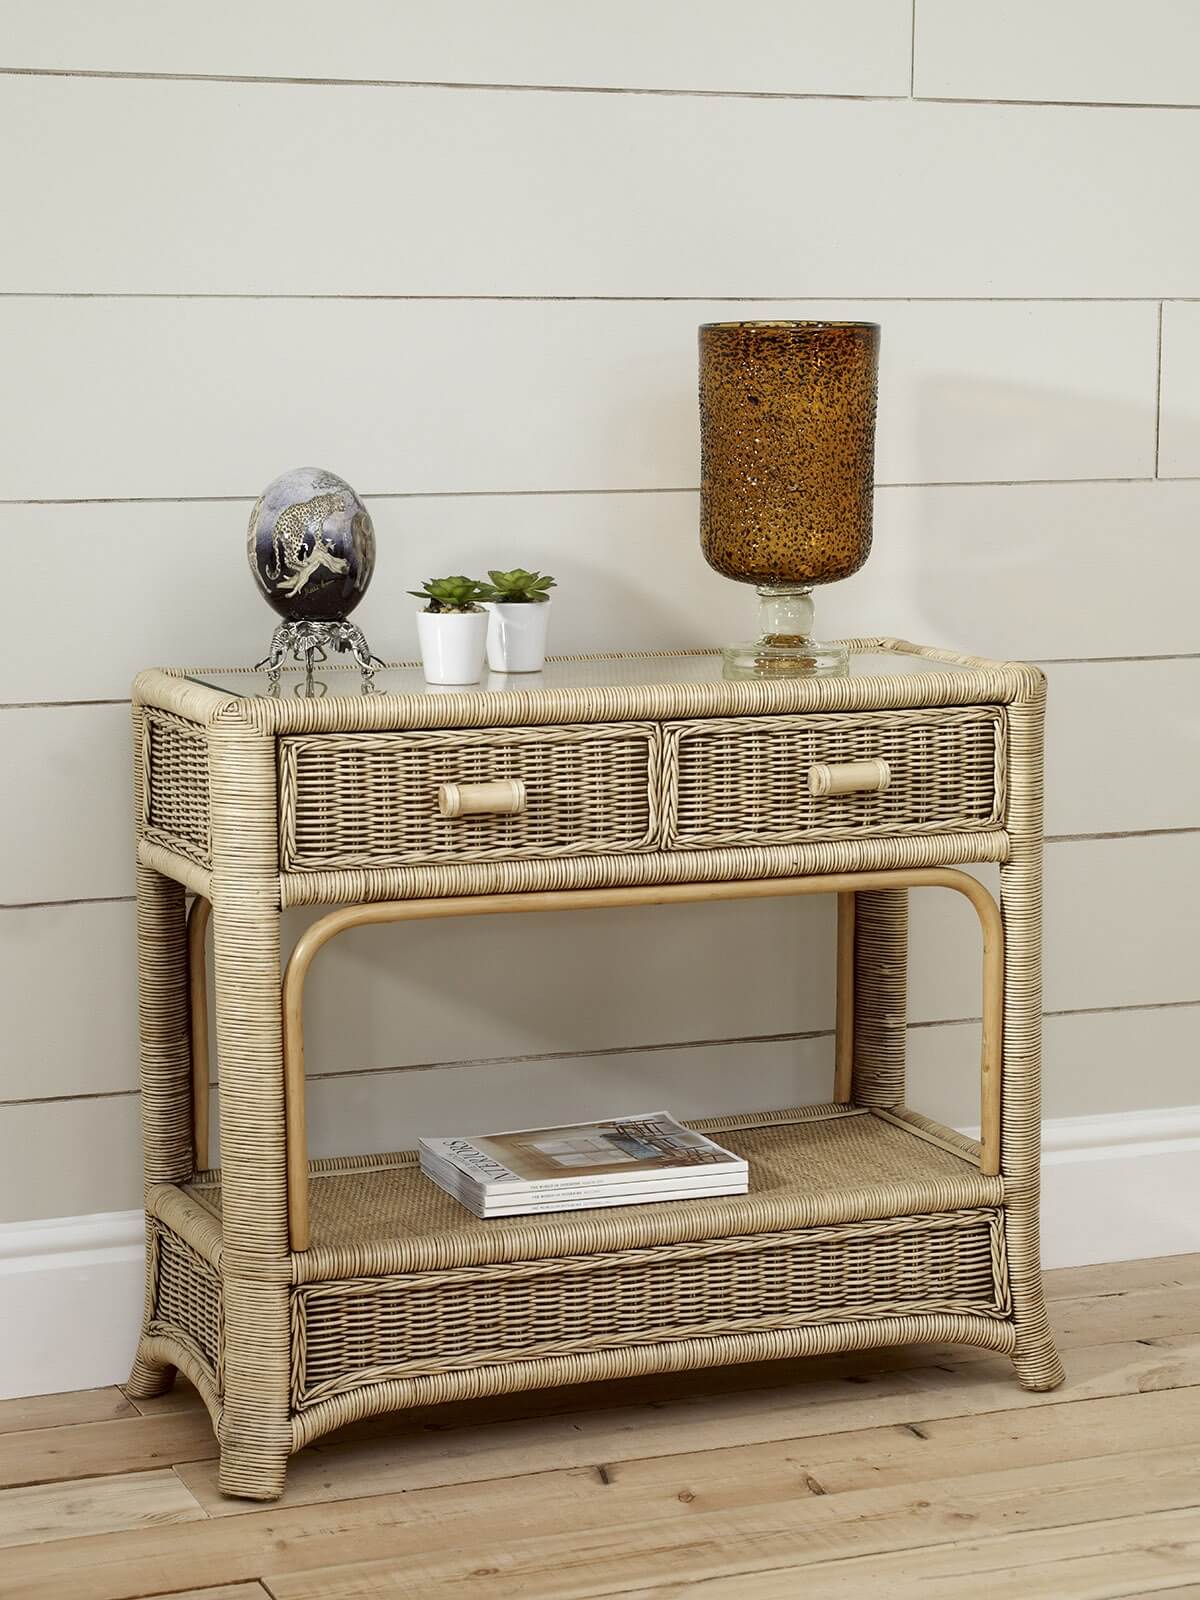 Showing image for Cane console table - glass top